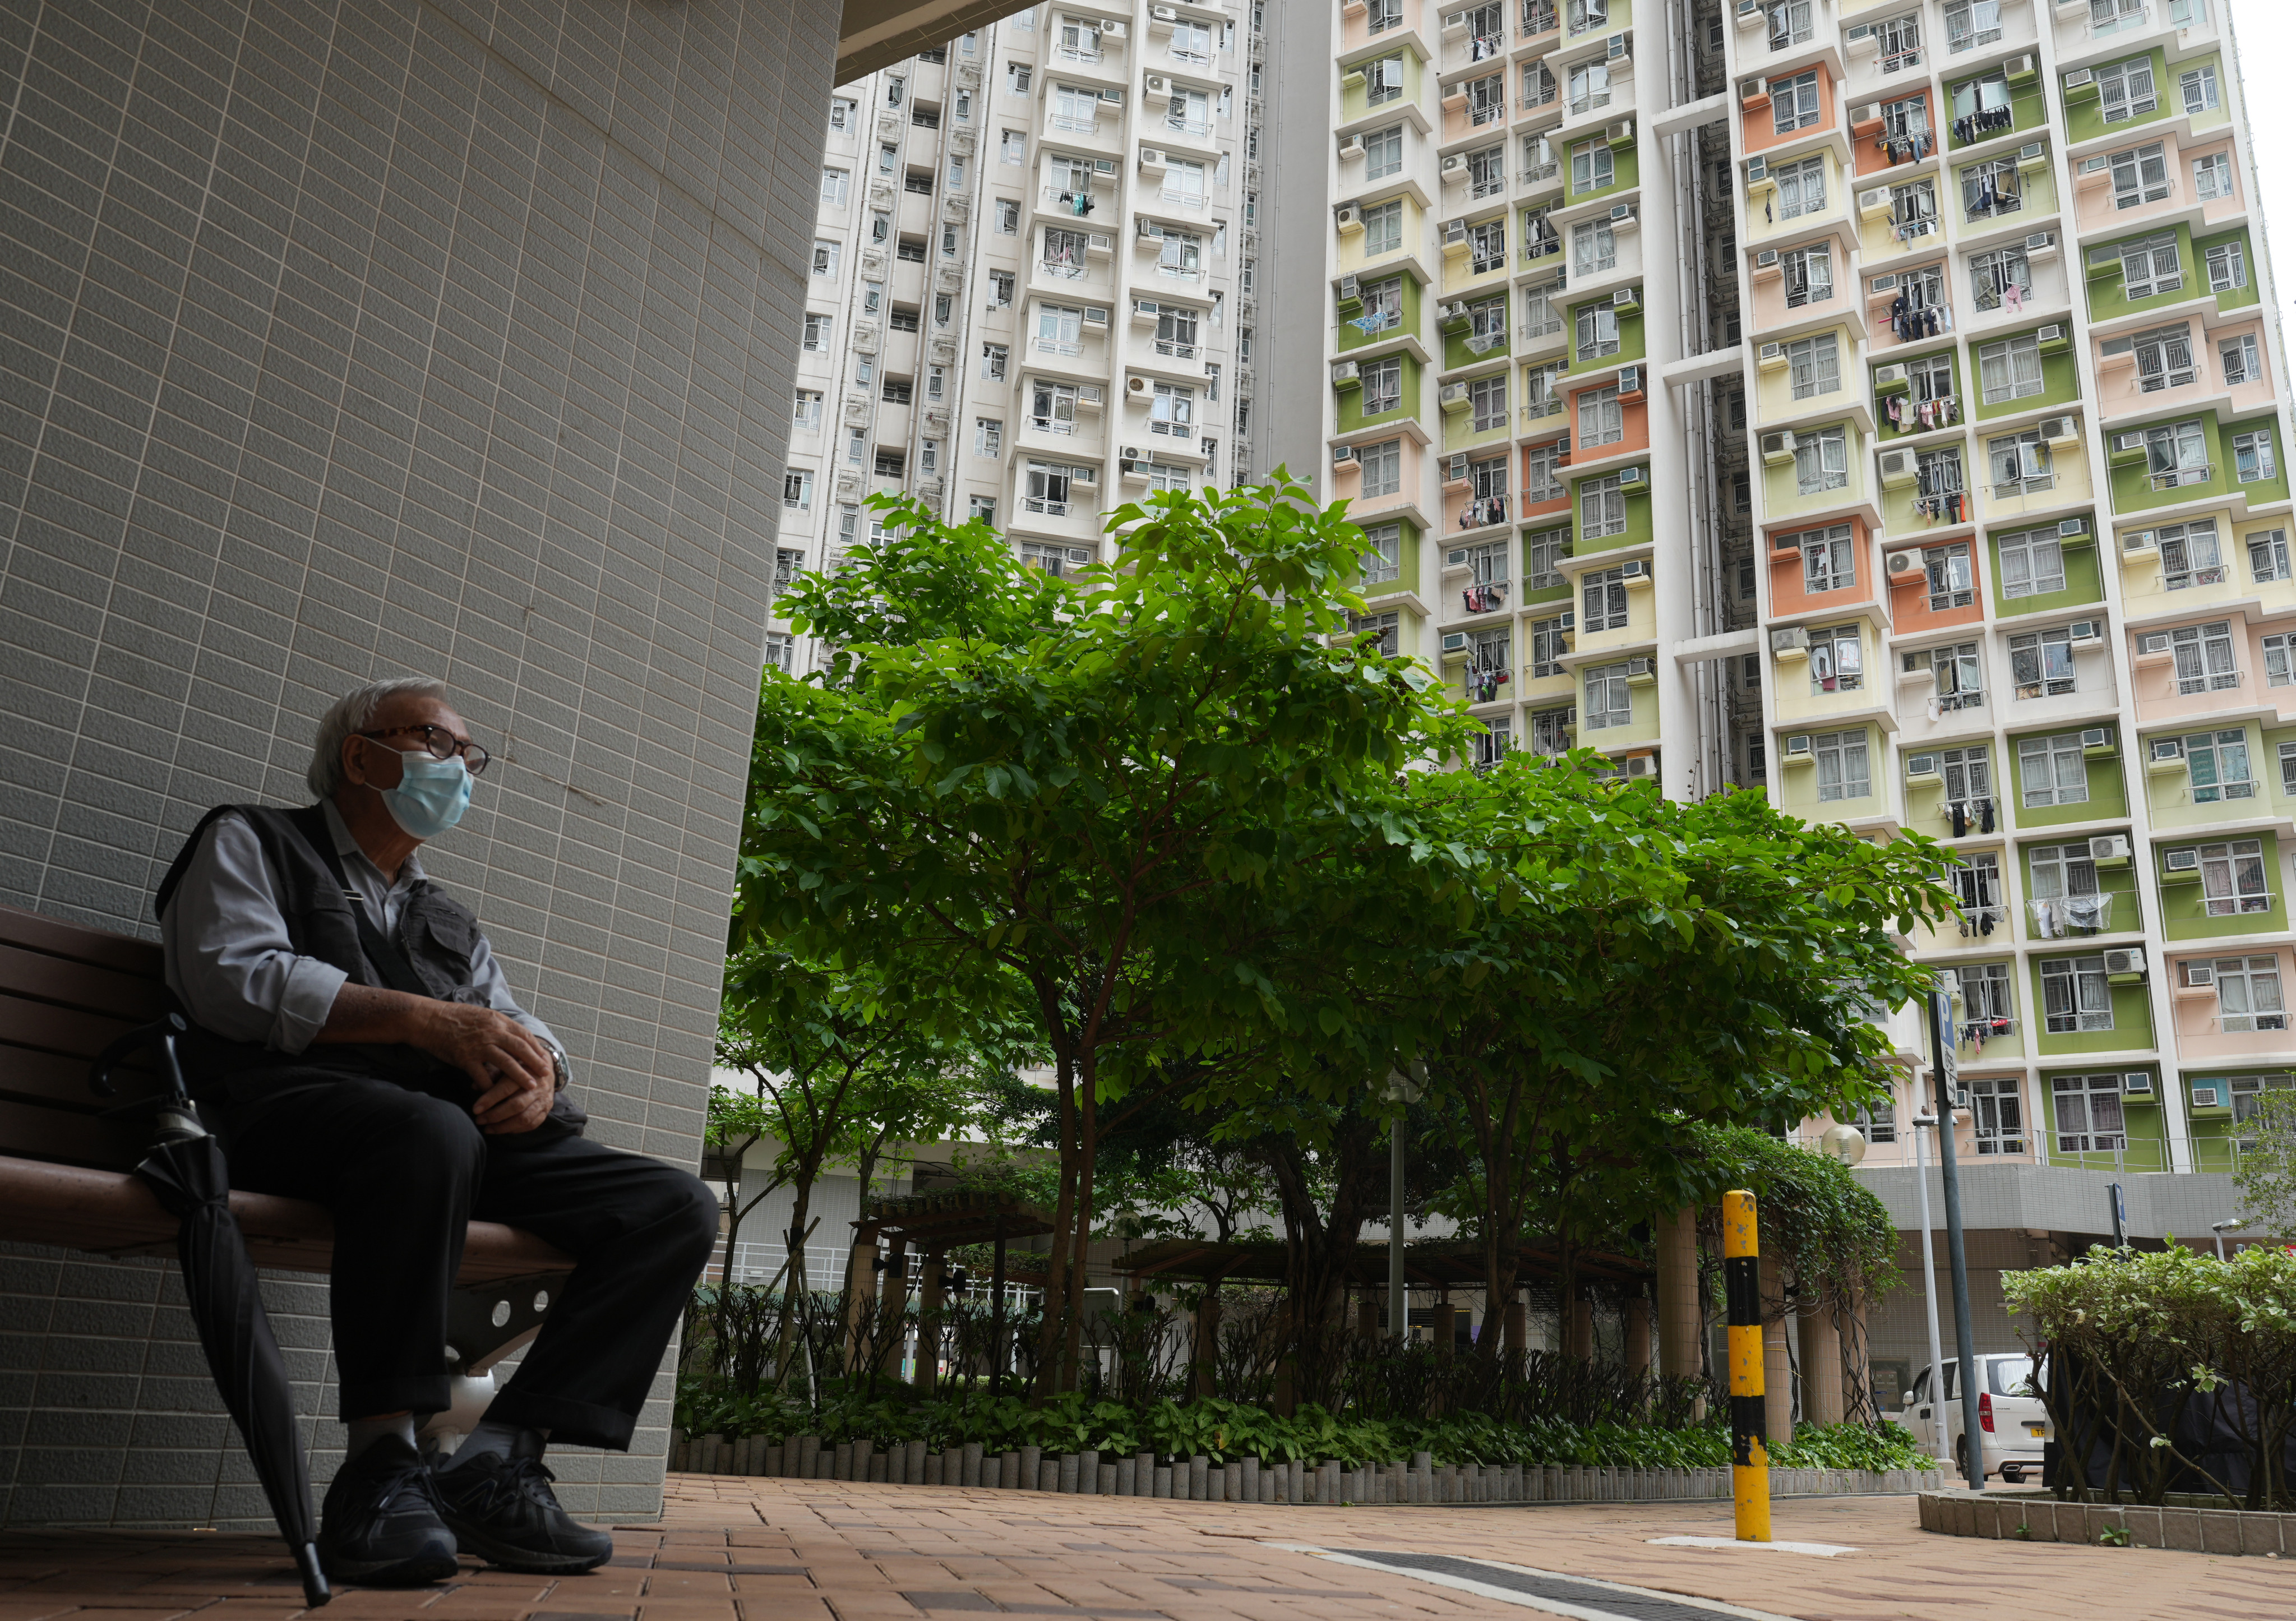 The average waiting time before moving into a public rental flat in Hong Kong has continued to fall, dropping from 5.5 years to 5.3 years, according to the latest quarterly statistics from the city’s Housing Authority. Photo: Sam Tsang